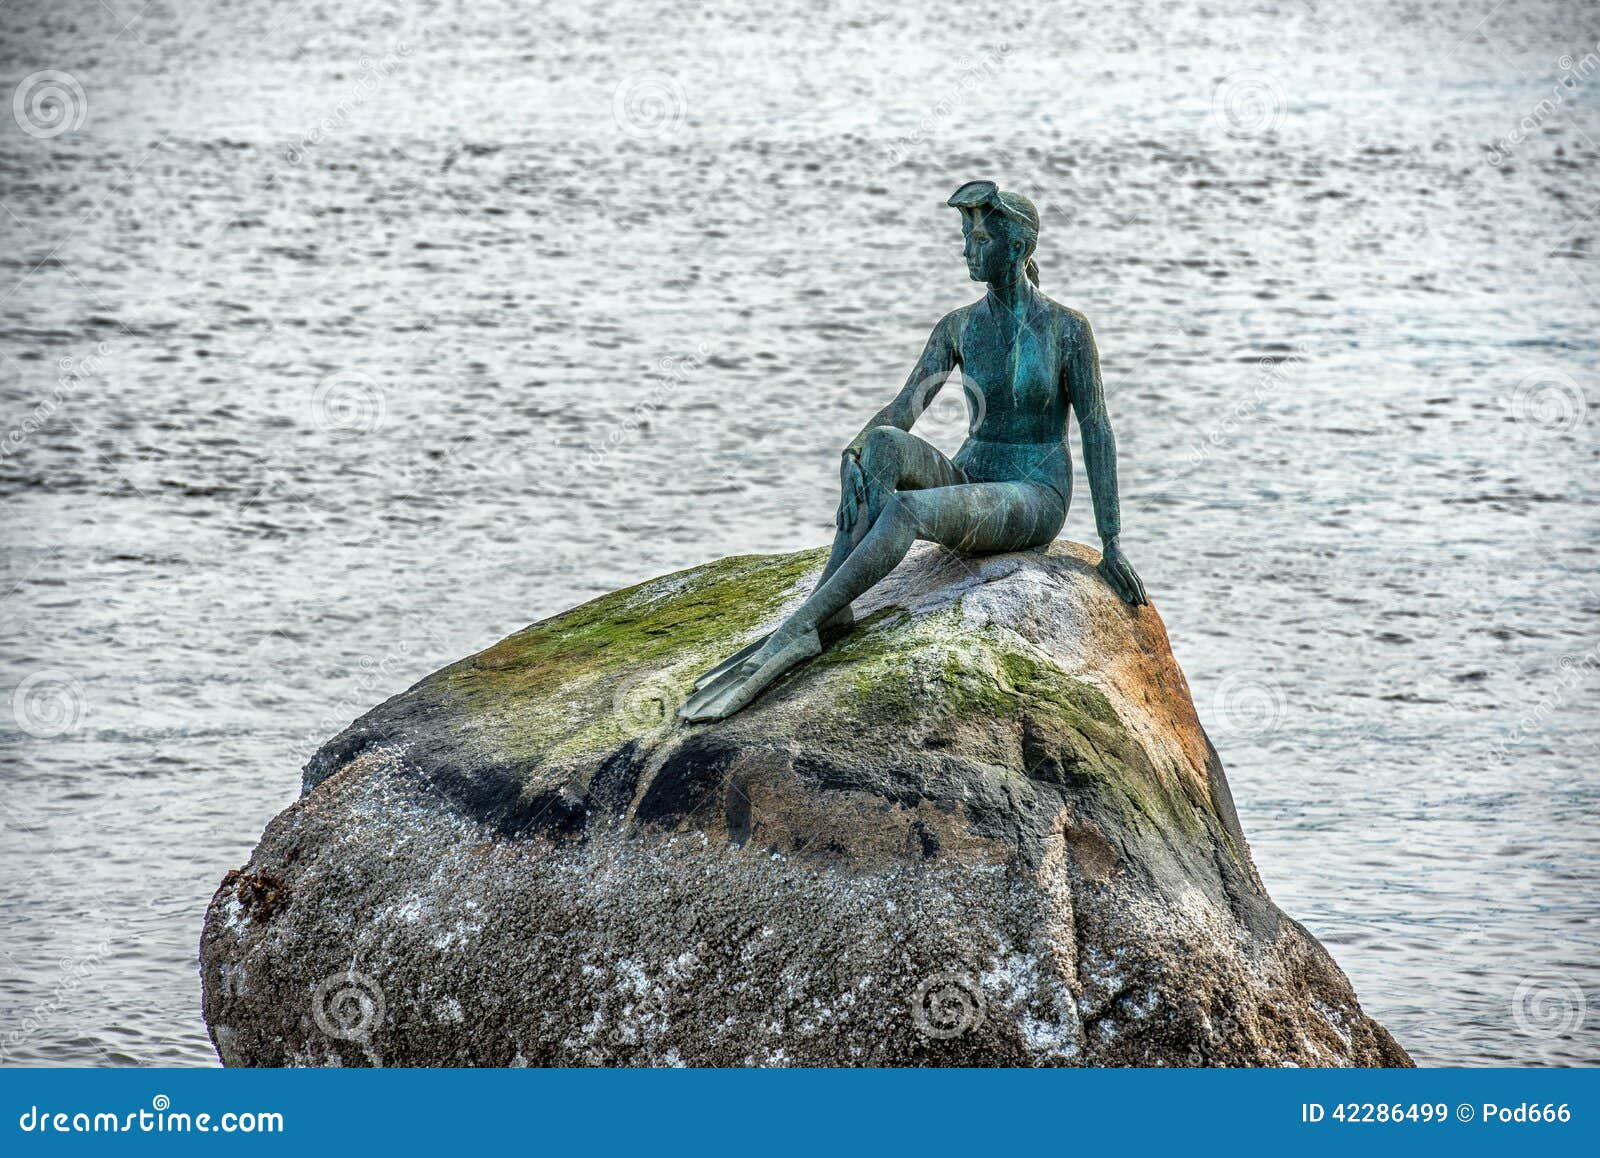 statue of the diver stanley park vancouver canada